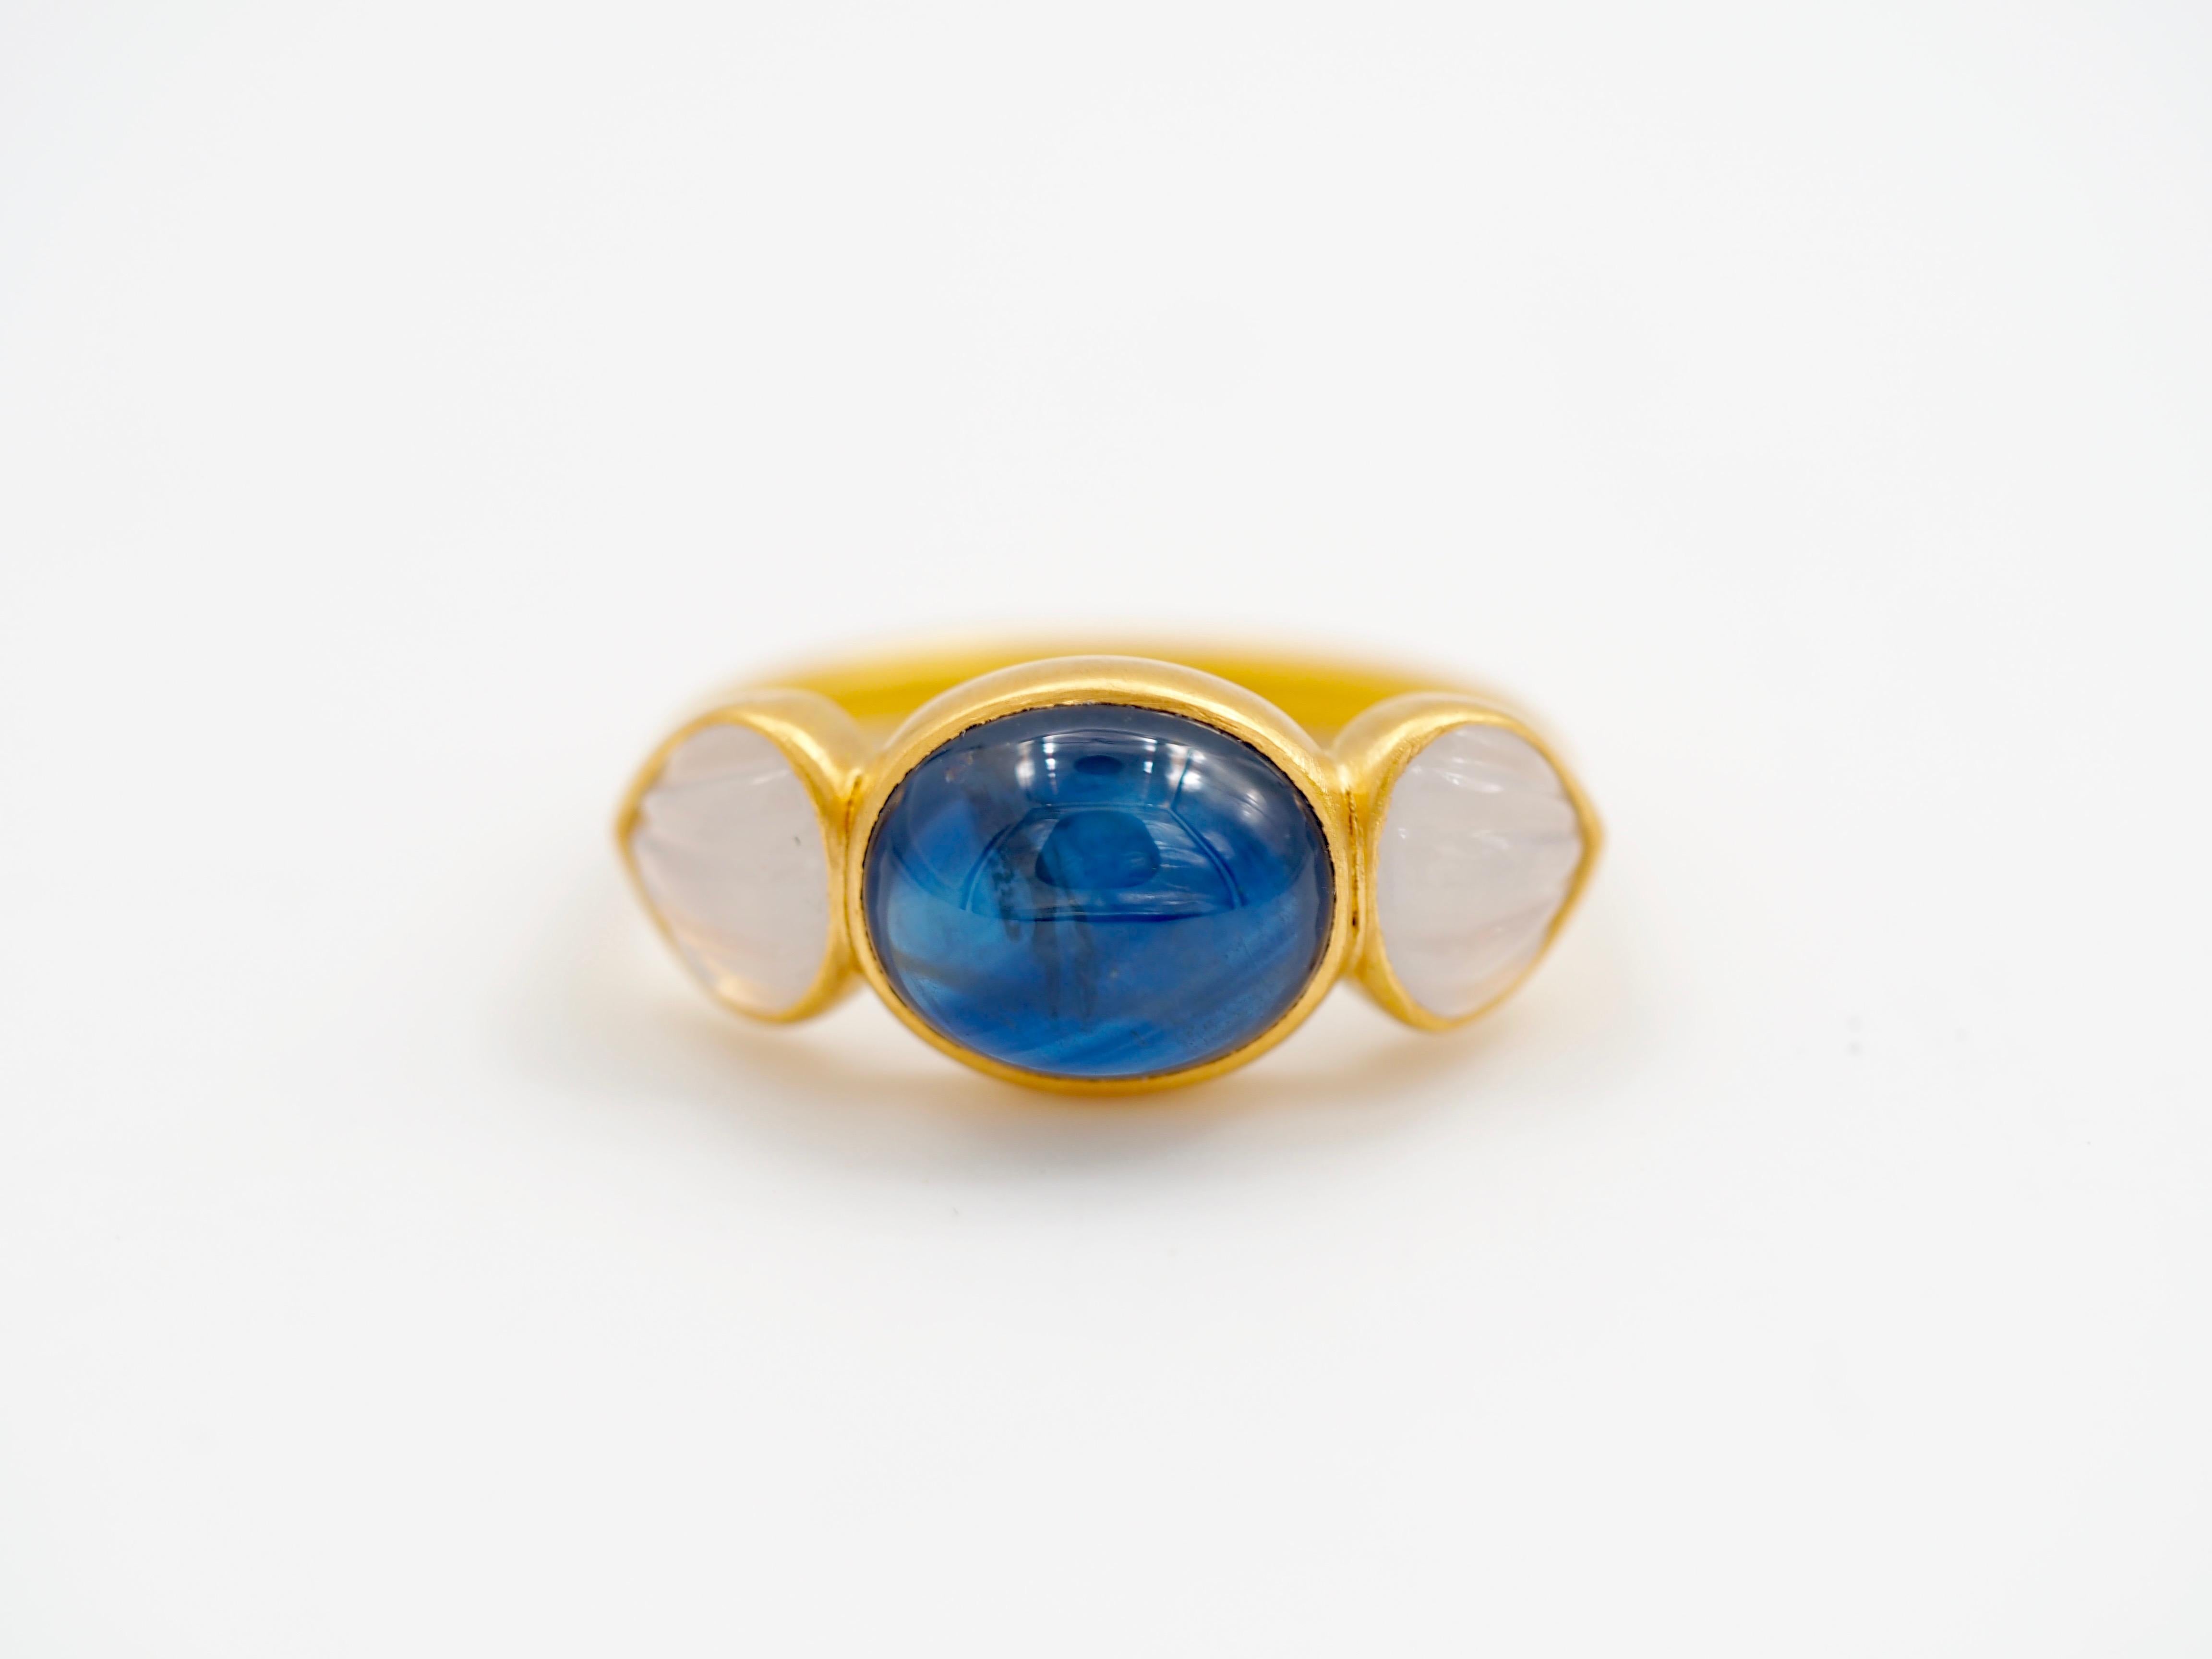 This delicate ring is composed of a deep blue natural sapphire cabochon of 7.58 cts surrounded by 2 white chalcedonies carved as shells (total 1.87cts). The sapphire is natural with typical inclusions and shows indications of heating. 

This